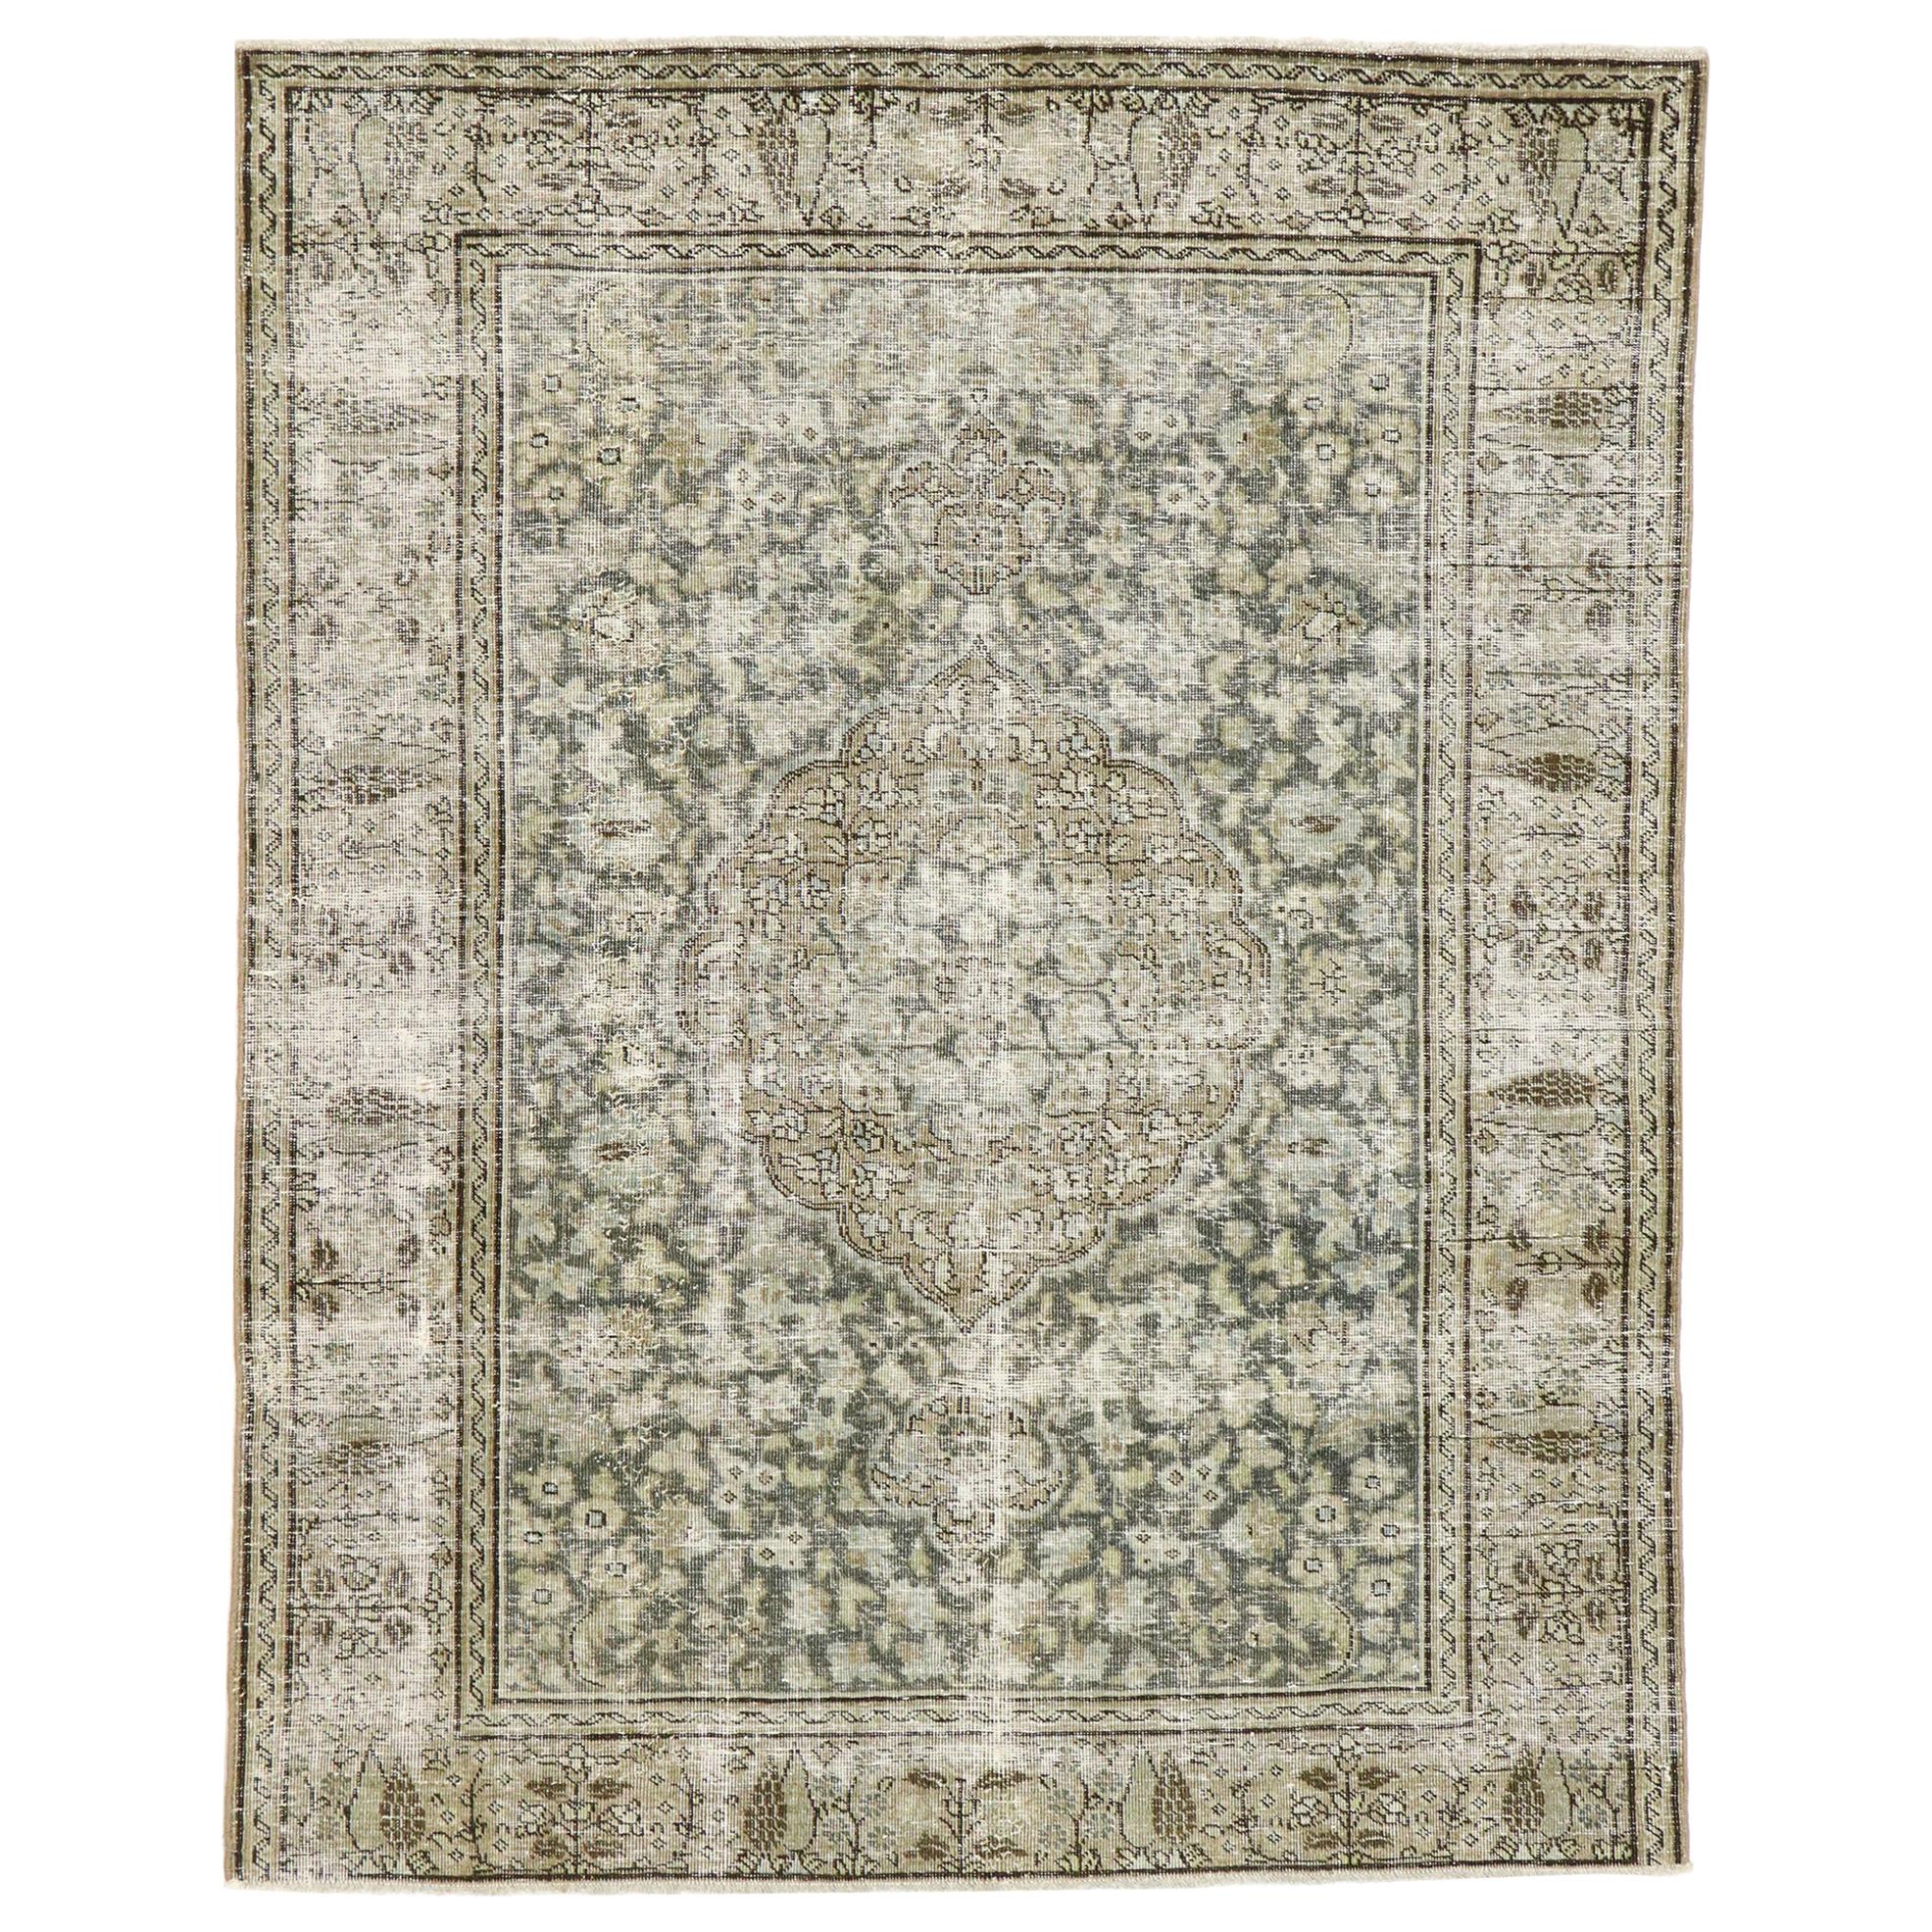 Distressed Antique Persian Tabriz Rug with Modern Industrial Style For Sale